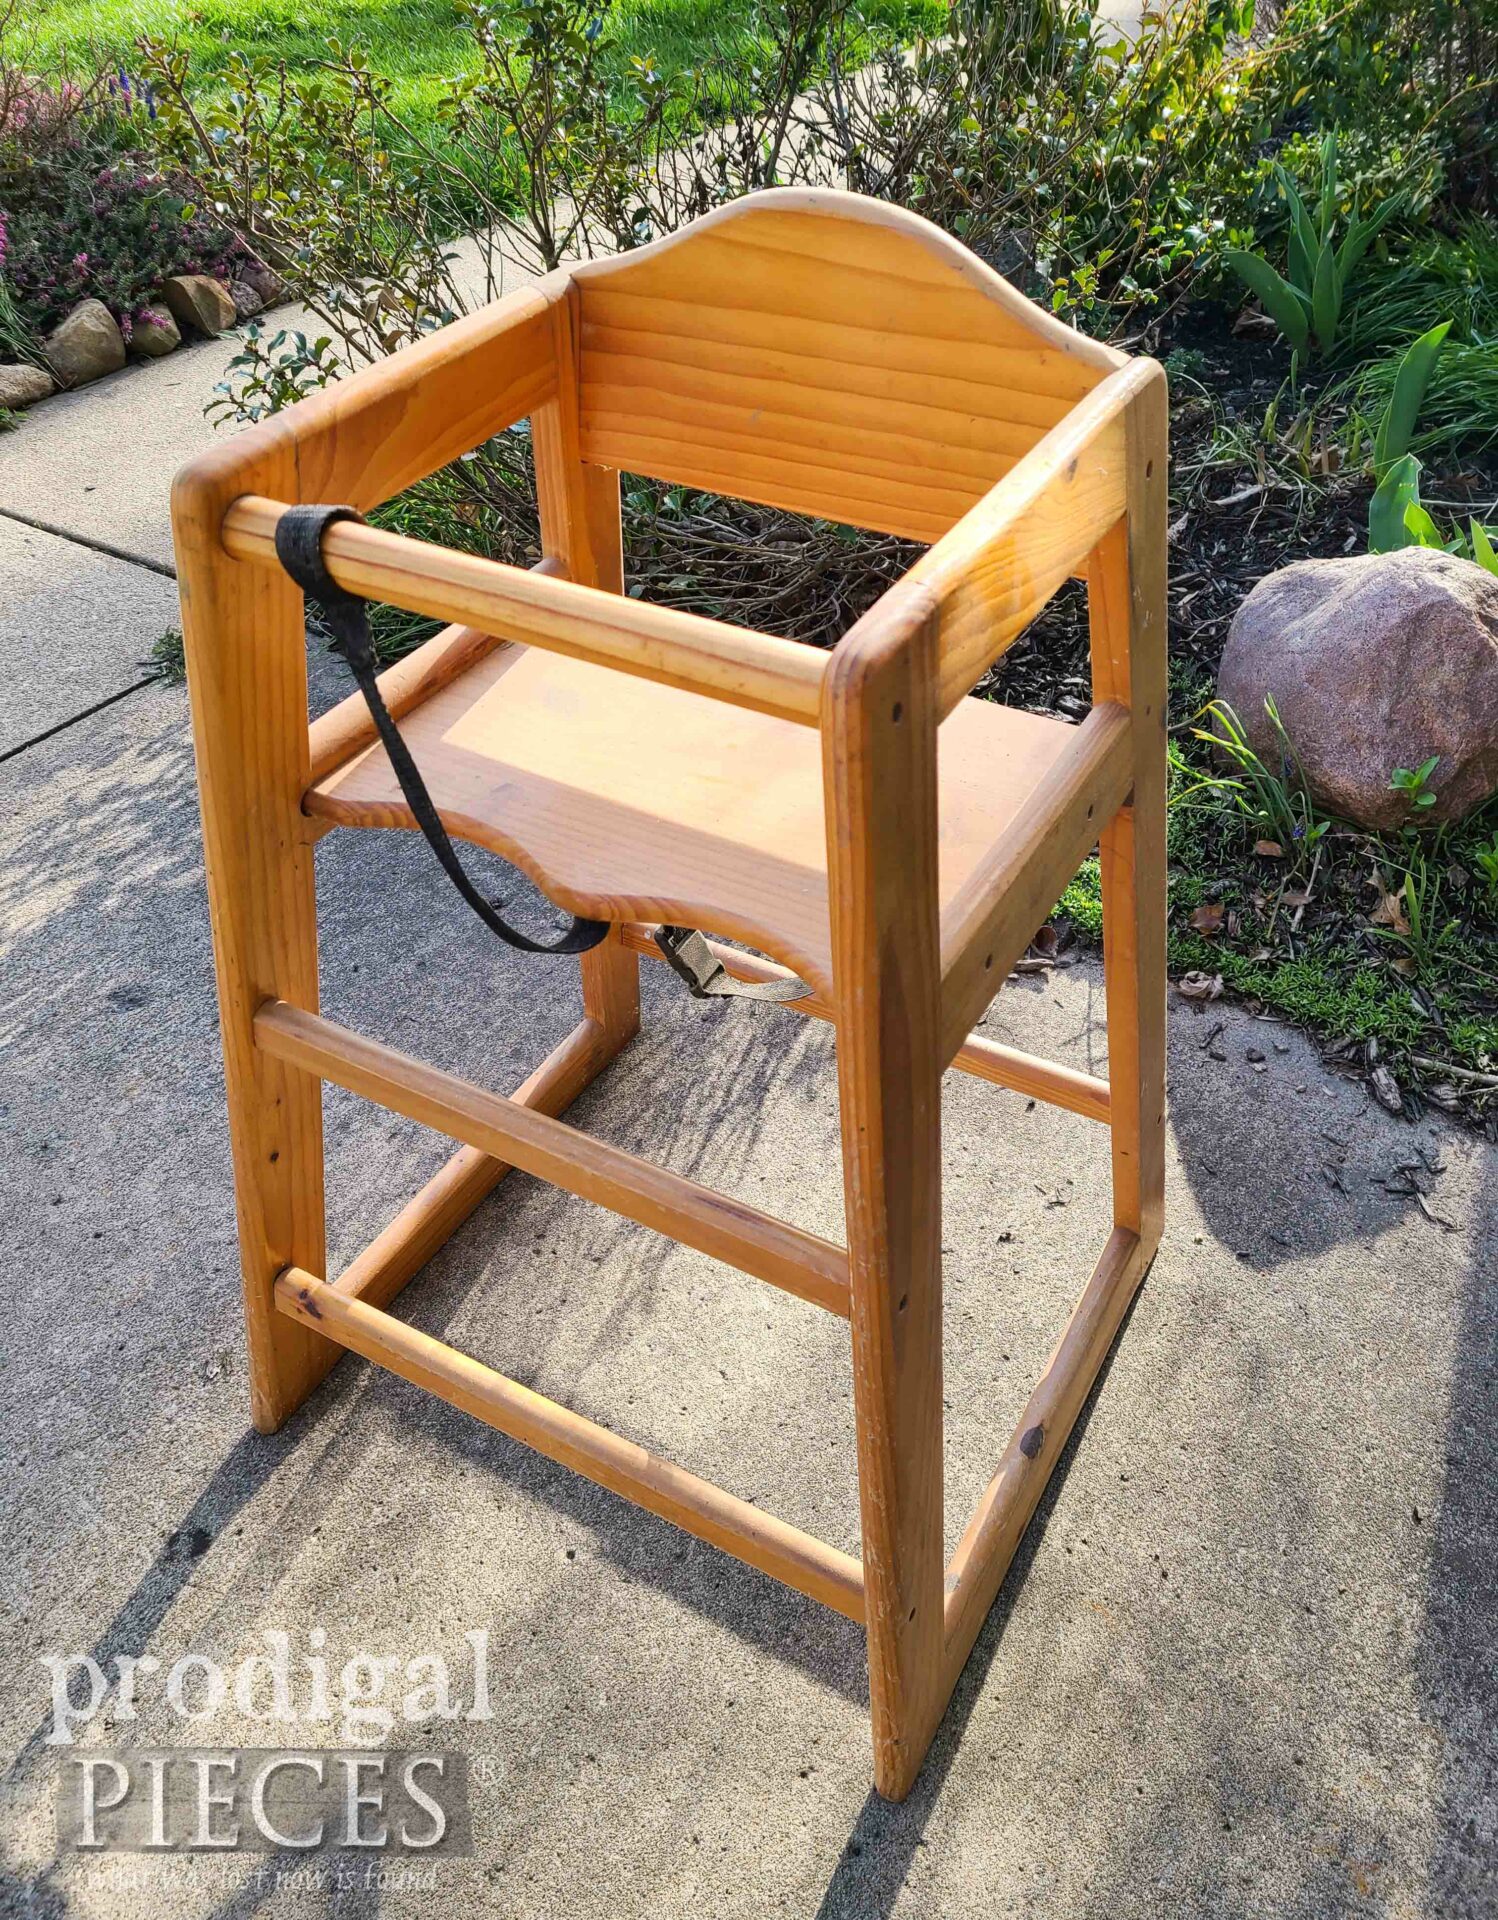 Top View and Side of DIY Painted Highchair | prodigalpieces.com #prodigalpieces